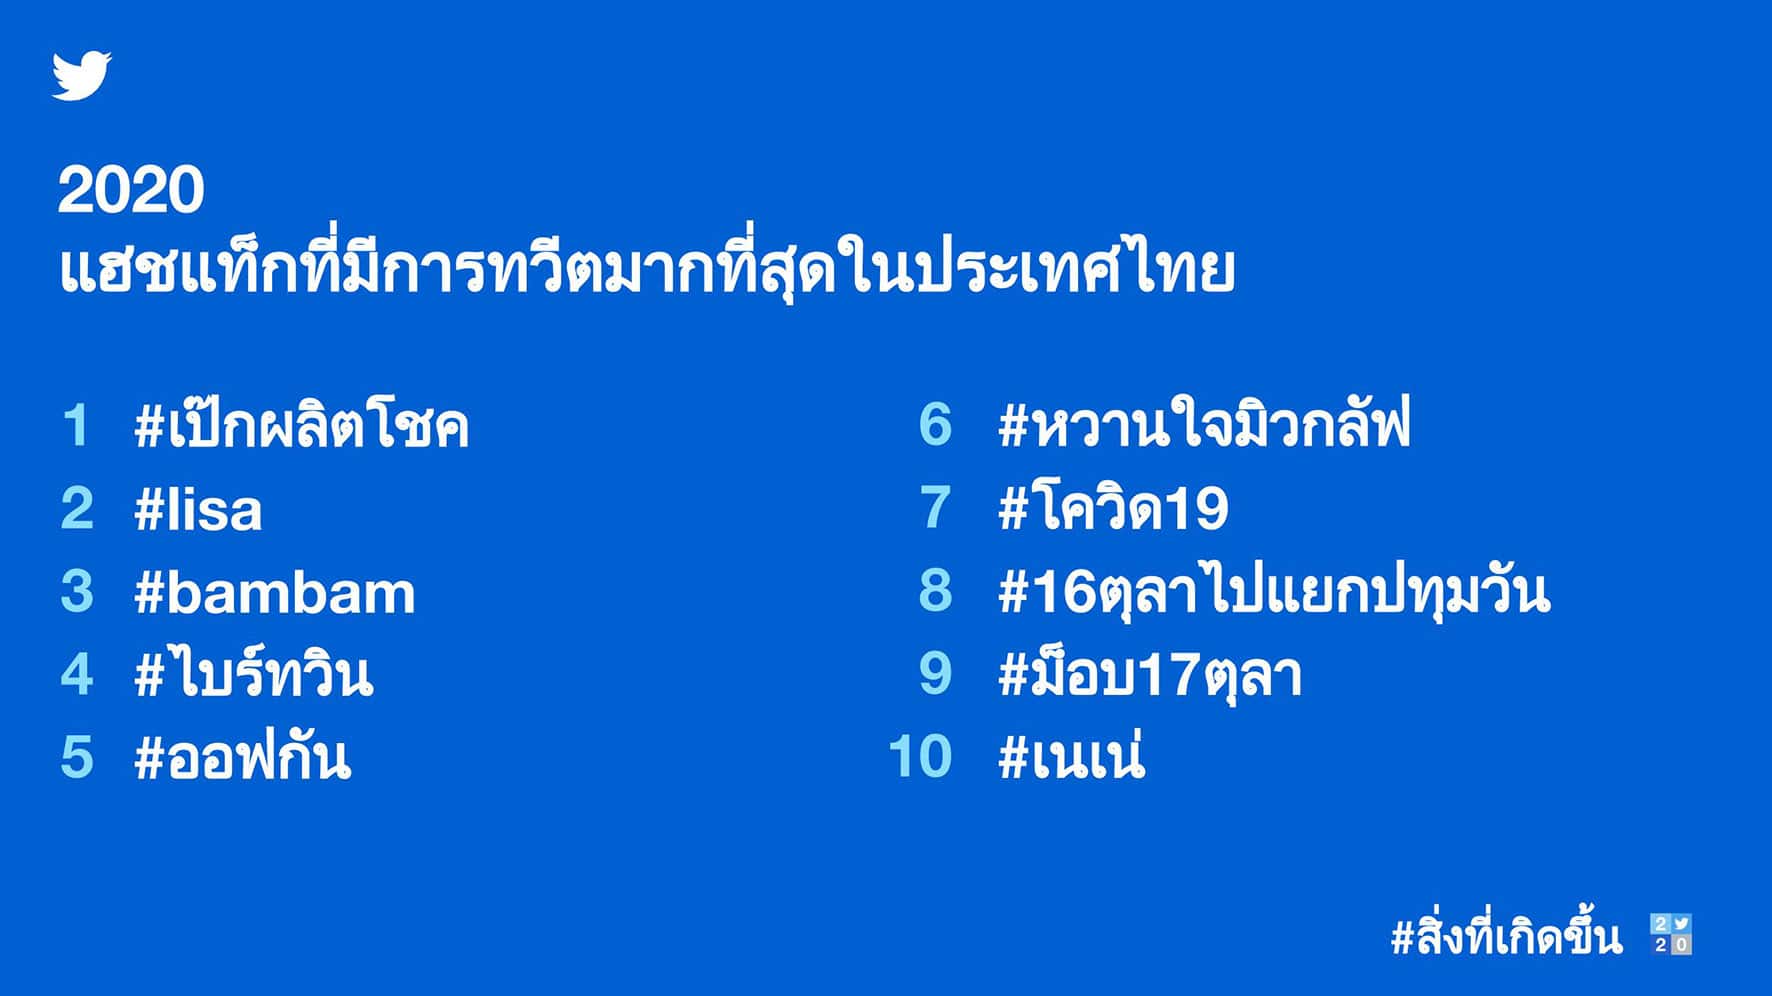 - Most Tweeted about hashtags in Thailand THA m - ภาพที่ 3